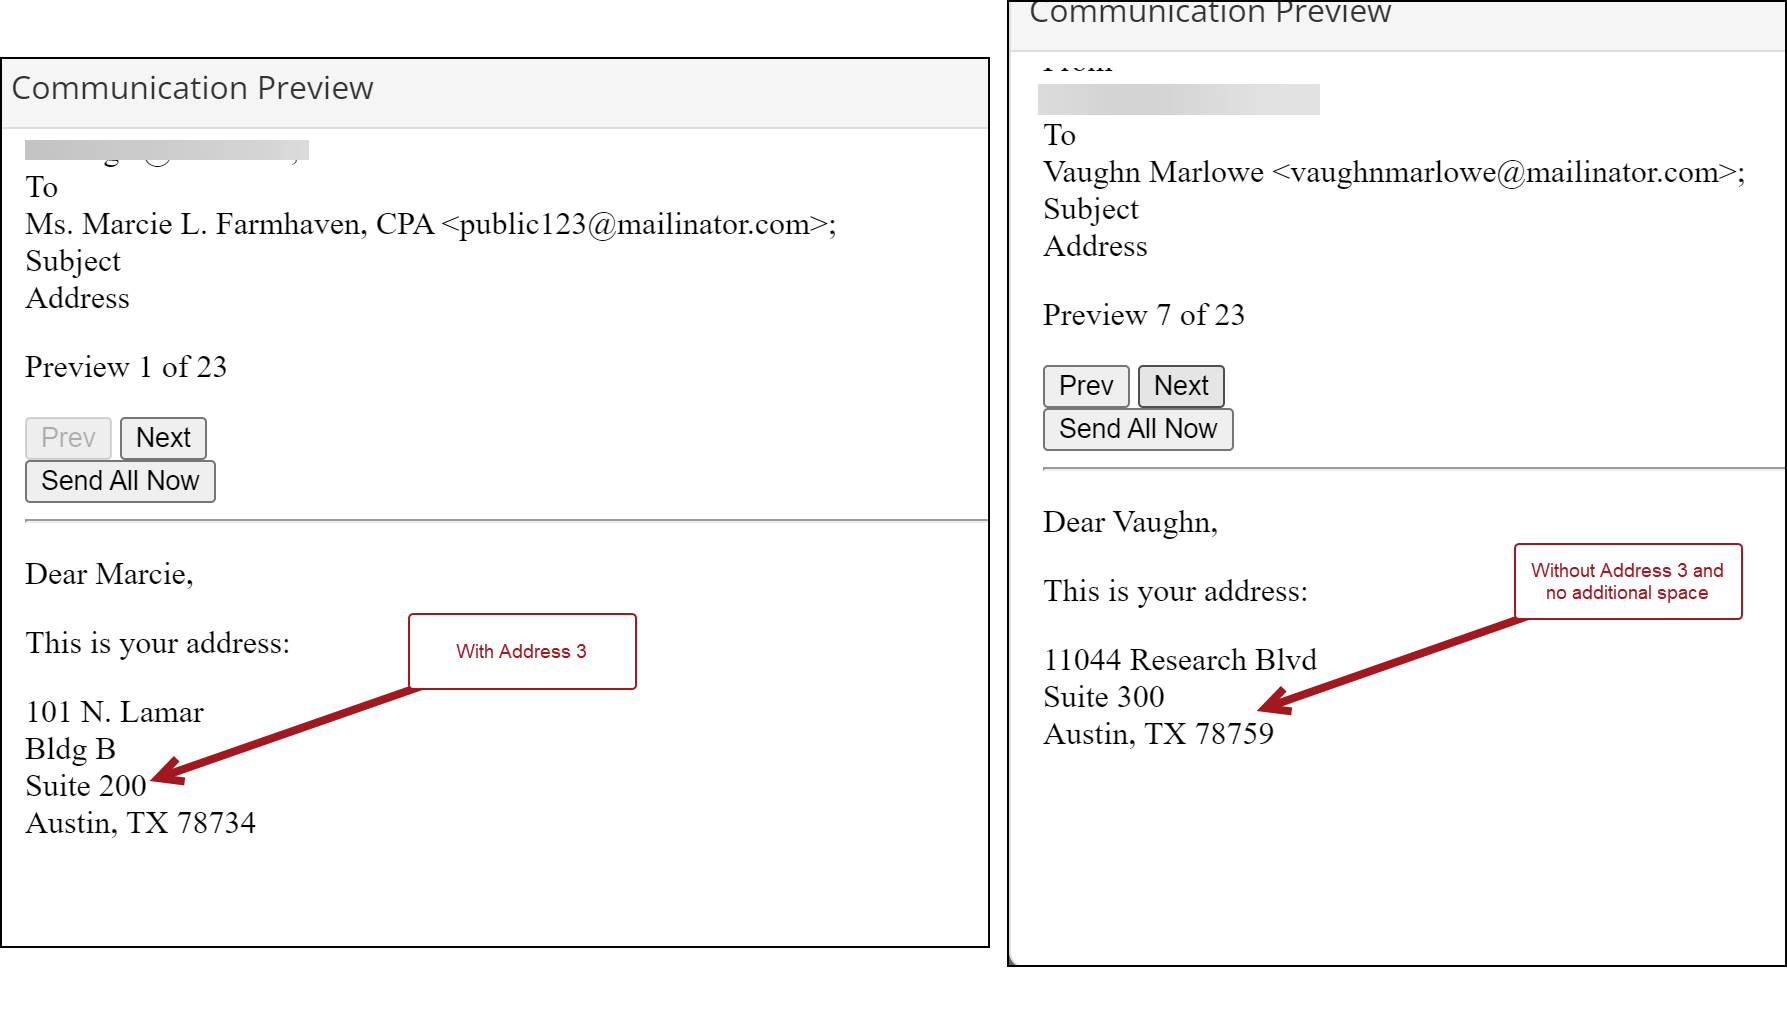 Split-screen image comparing two communication previews with conditional functions. On the left, the preview shows a complete address with the Address 3 line included for the recipient. On the right, the address for a different recipient excludes the Address 3 line and there's no additional space where the line would be, demonstrating the conditional formatting in action.